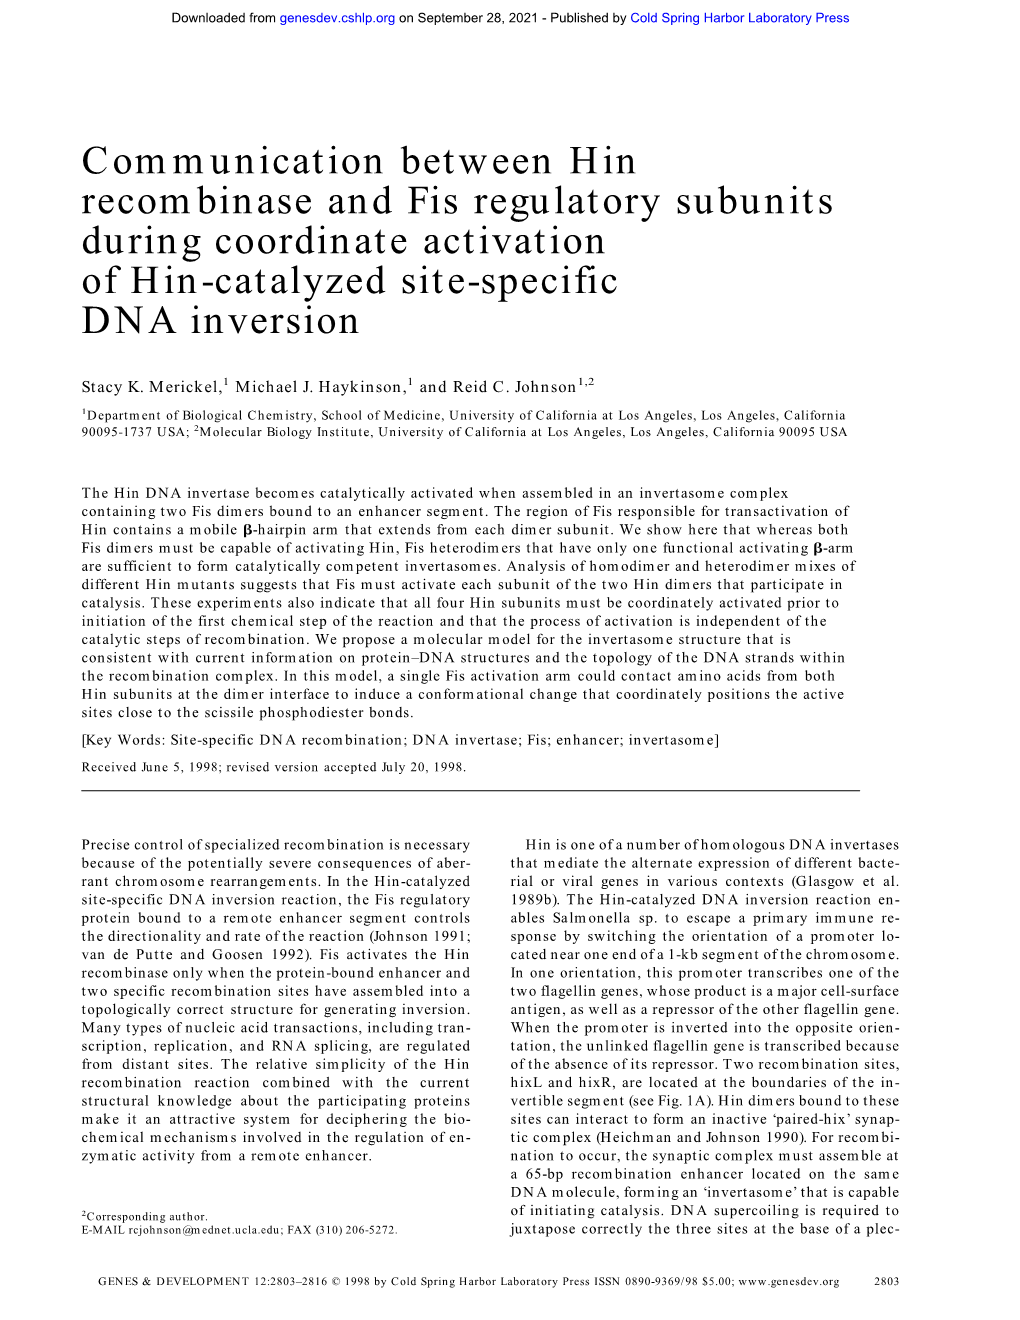 Communication Between Hin Recombinase and Fis Regulatory Subunits During Coordinate Activation of Hin-Catalyzed Site-Specific DNA Inversion